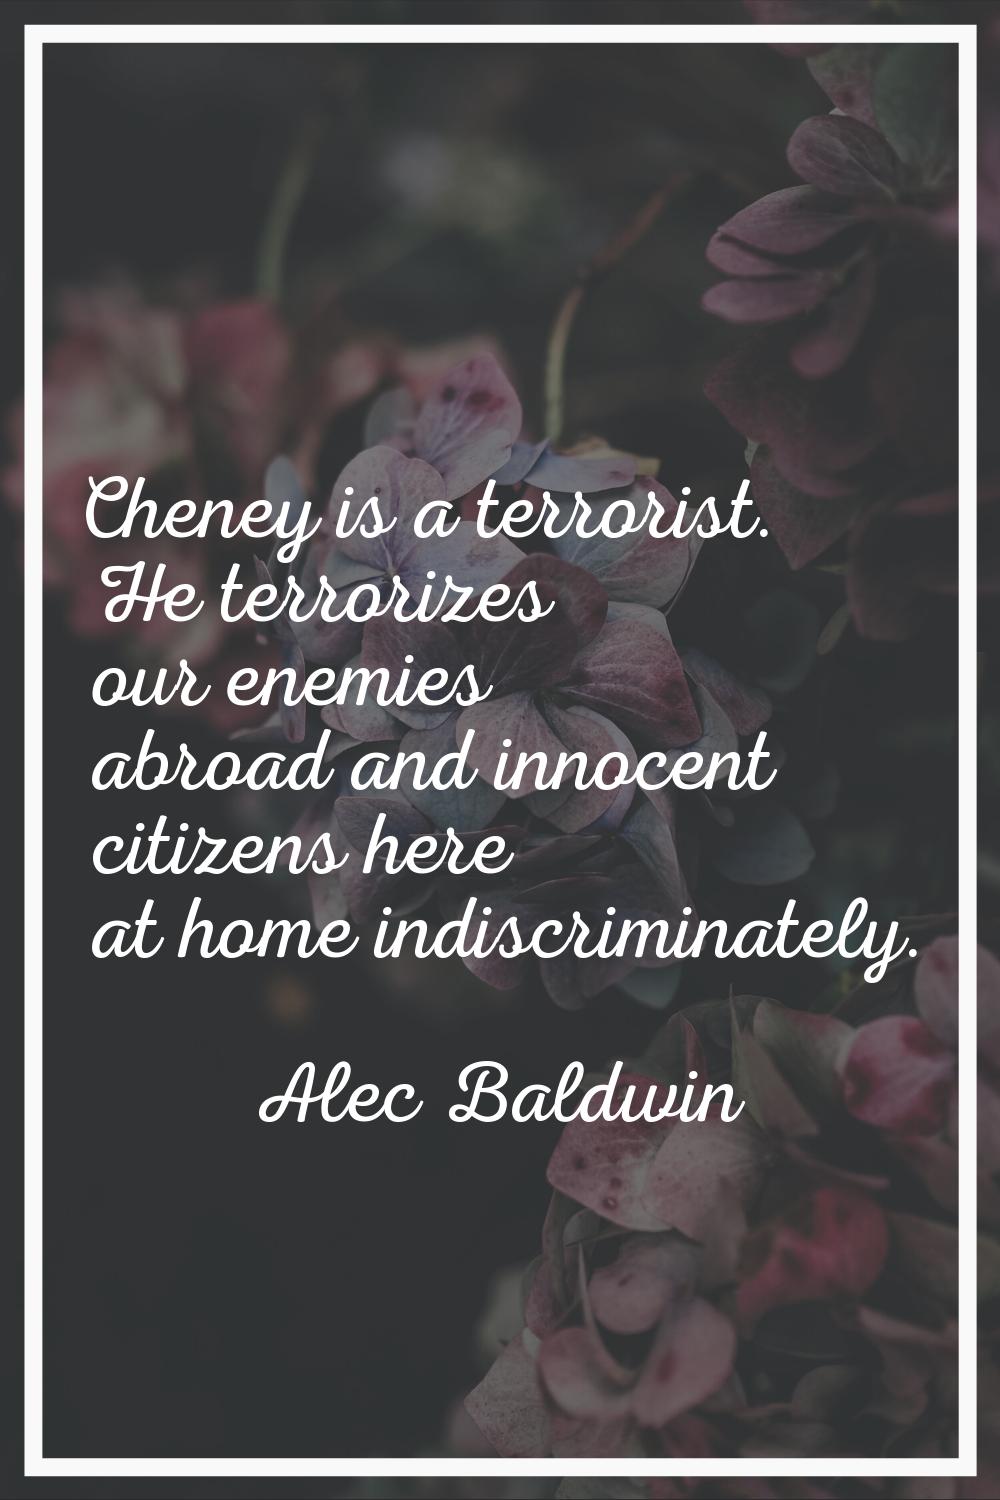 Cheney is a terrorist. He terrorizes our enemies abroad and innocent citizens here at home indiscri